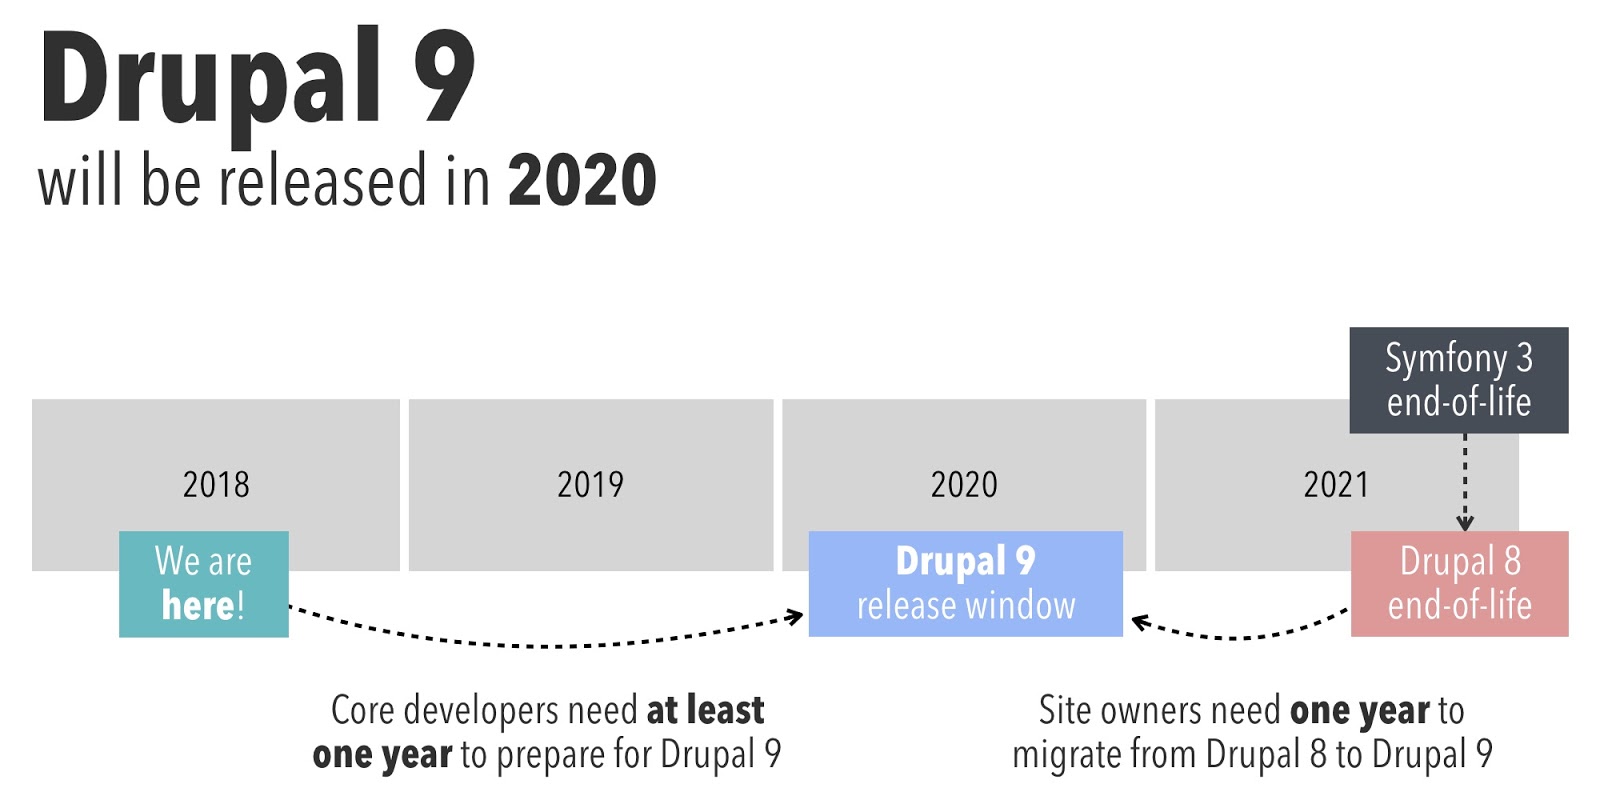 timeline: Drupal 9 will be released in 2020. Drupal 8 end of life is planned for 2021 